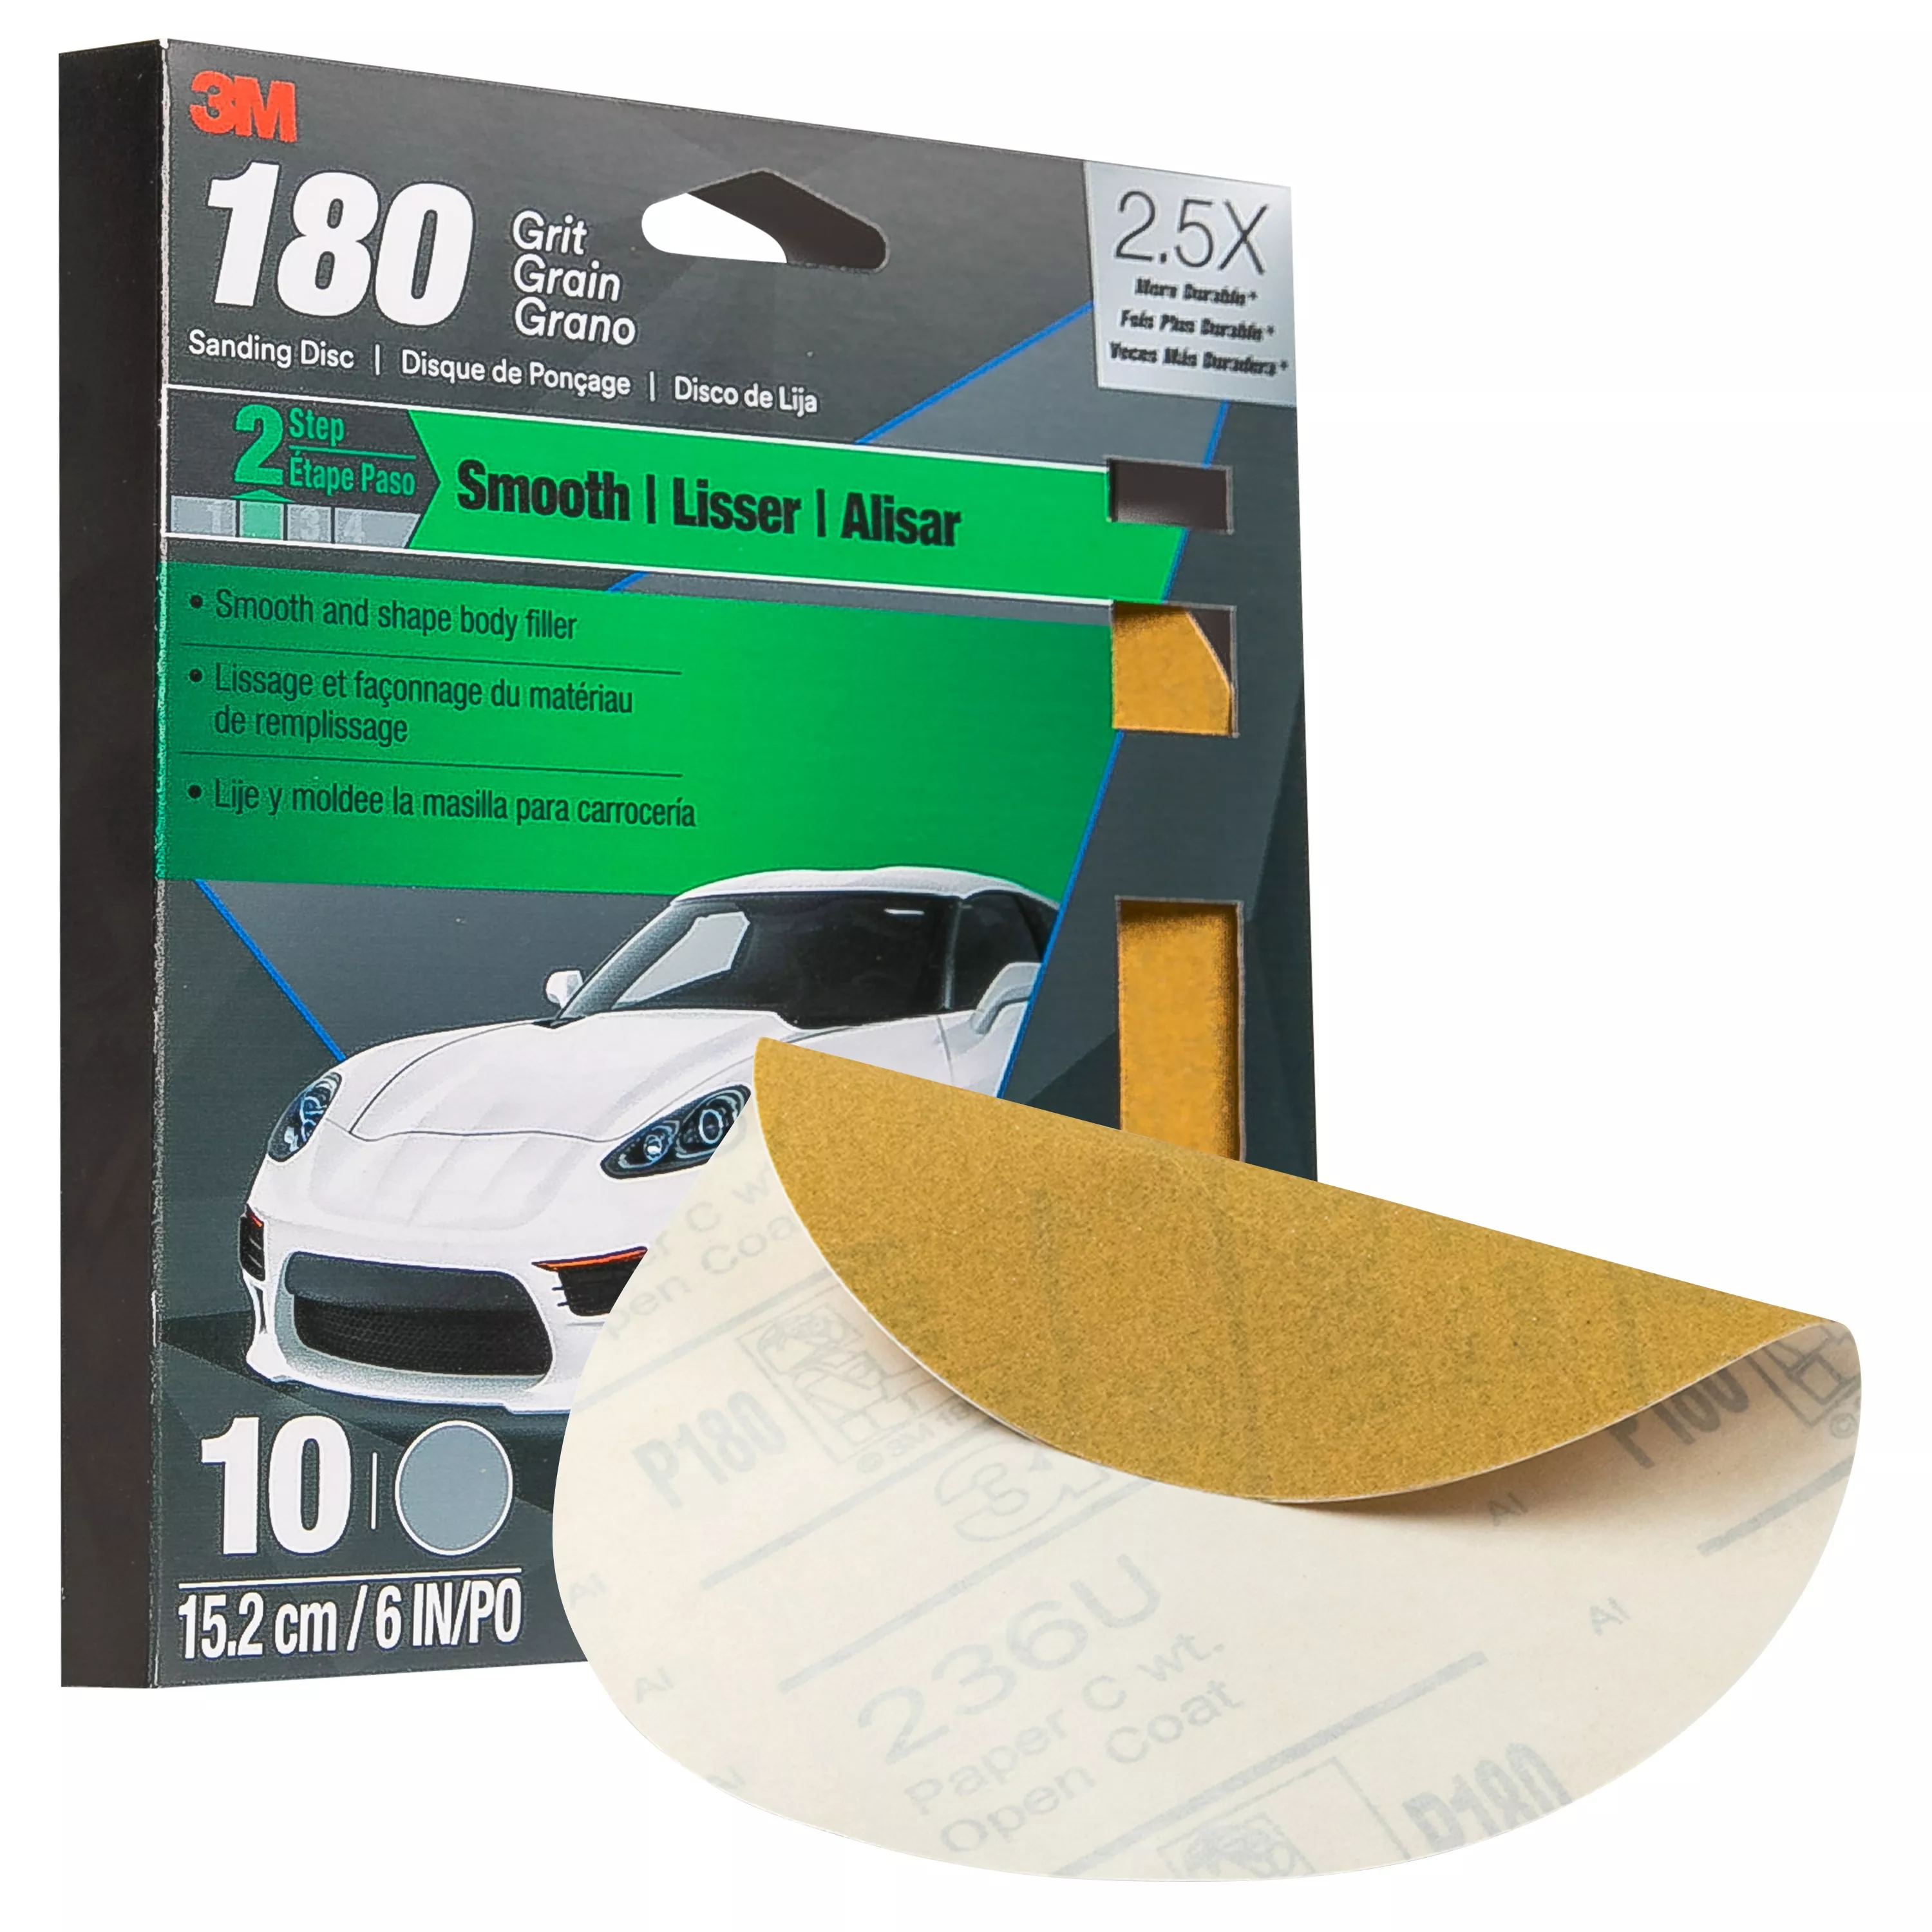 3M™ Sanding Discs with Stikit™ Attachment 10 Pack, 31448, 6 in, 180
grit, 10 packs per case